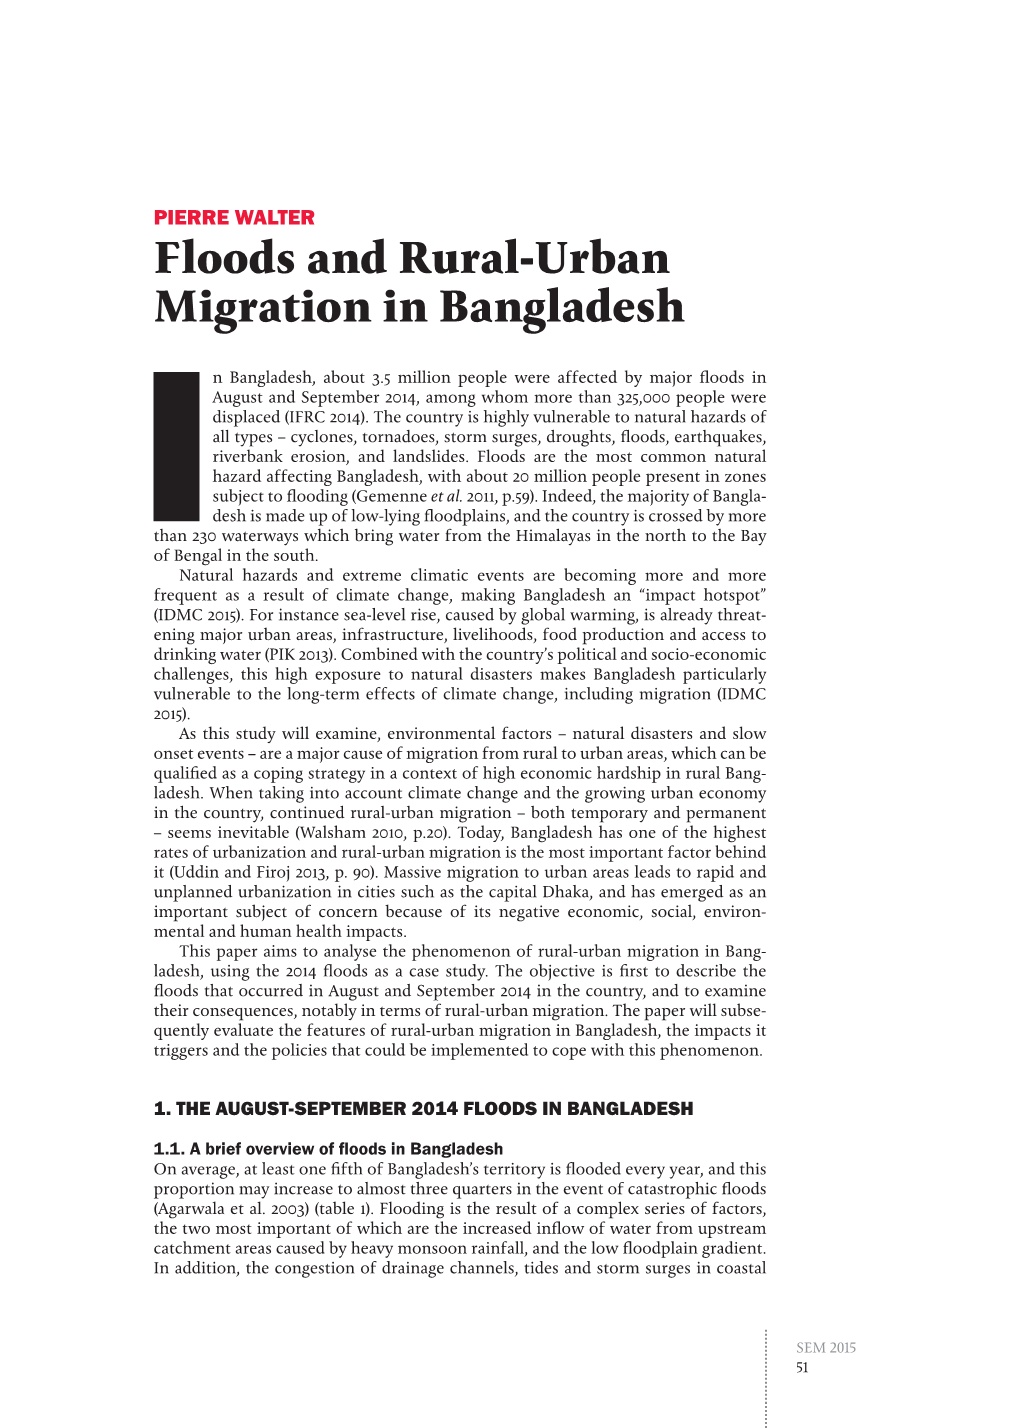 Floods and Rural-Urban Migration in Bangladesh